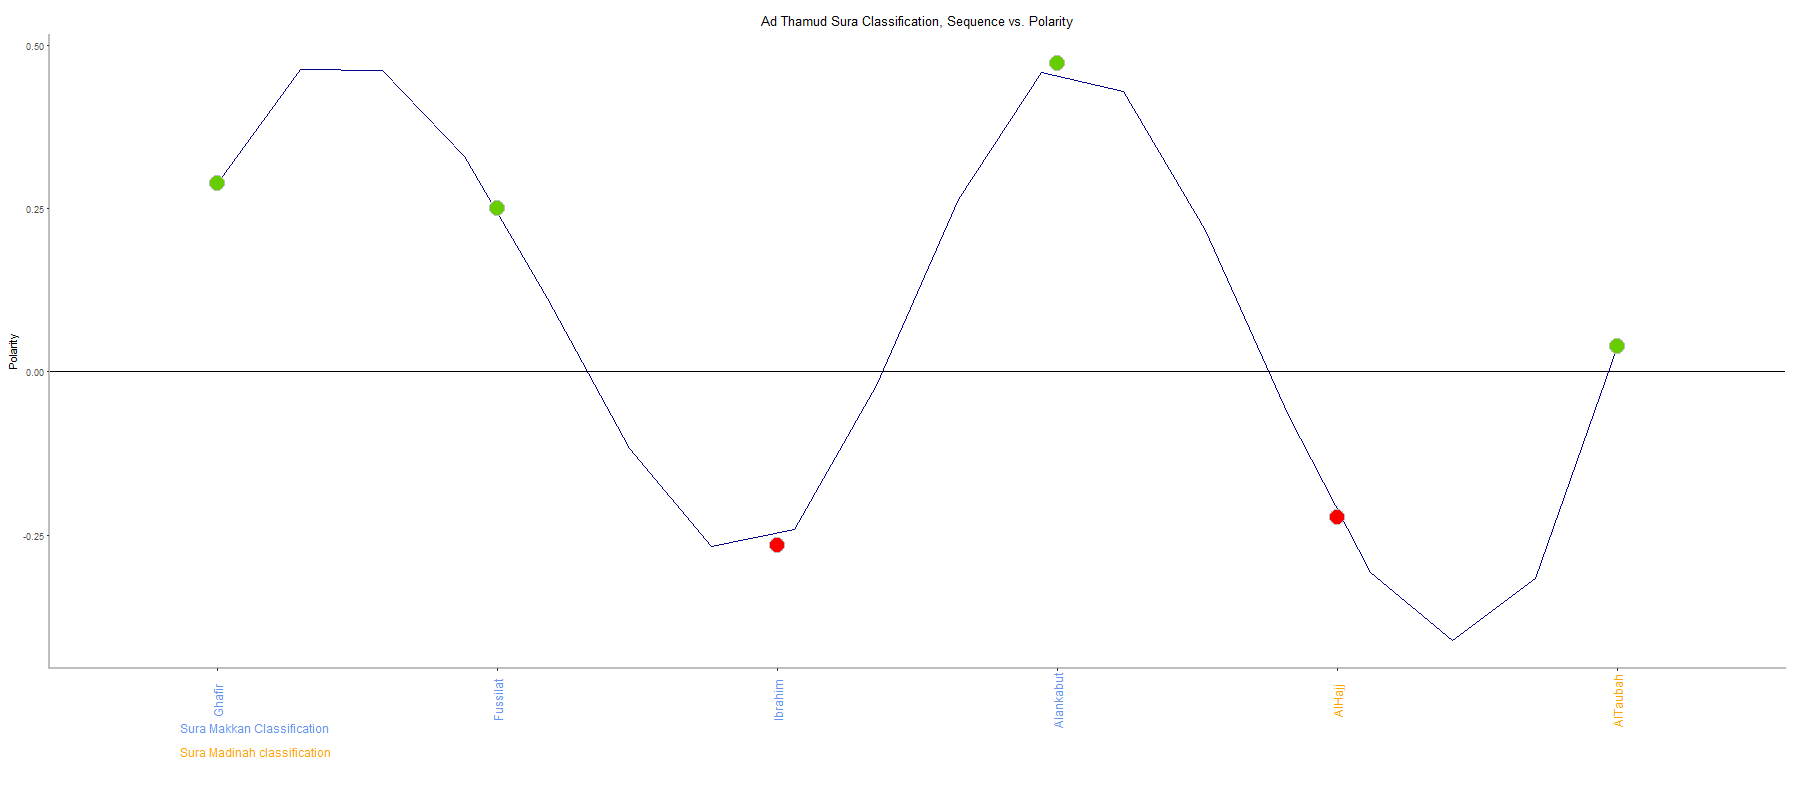 Ad thamud by Sura Classification plot.png